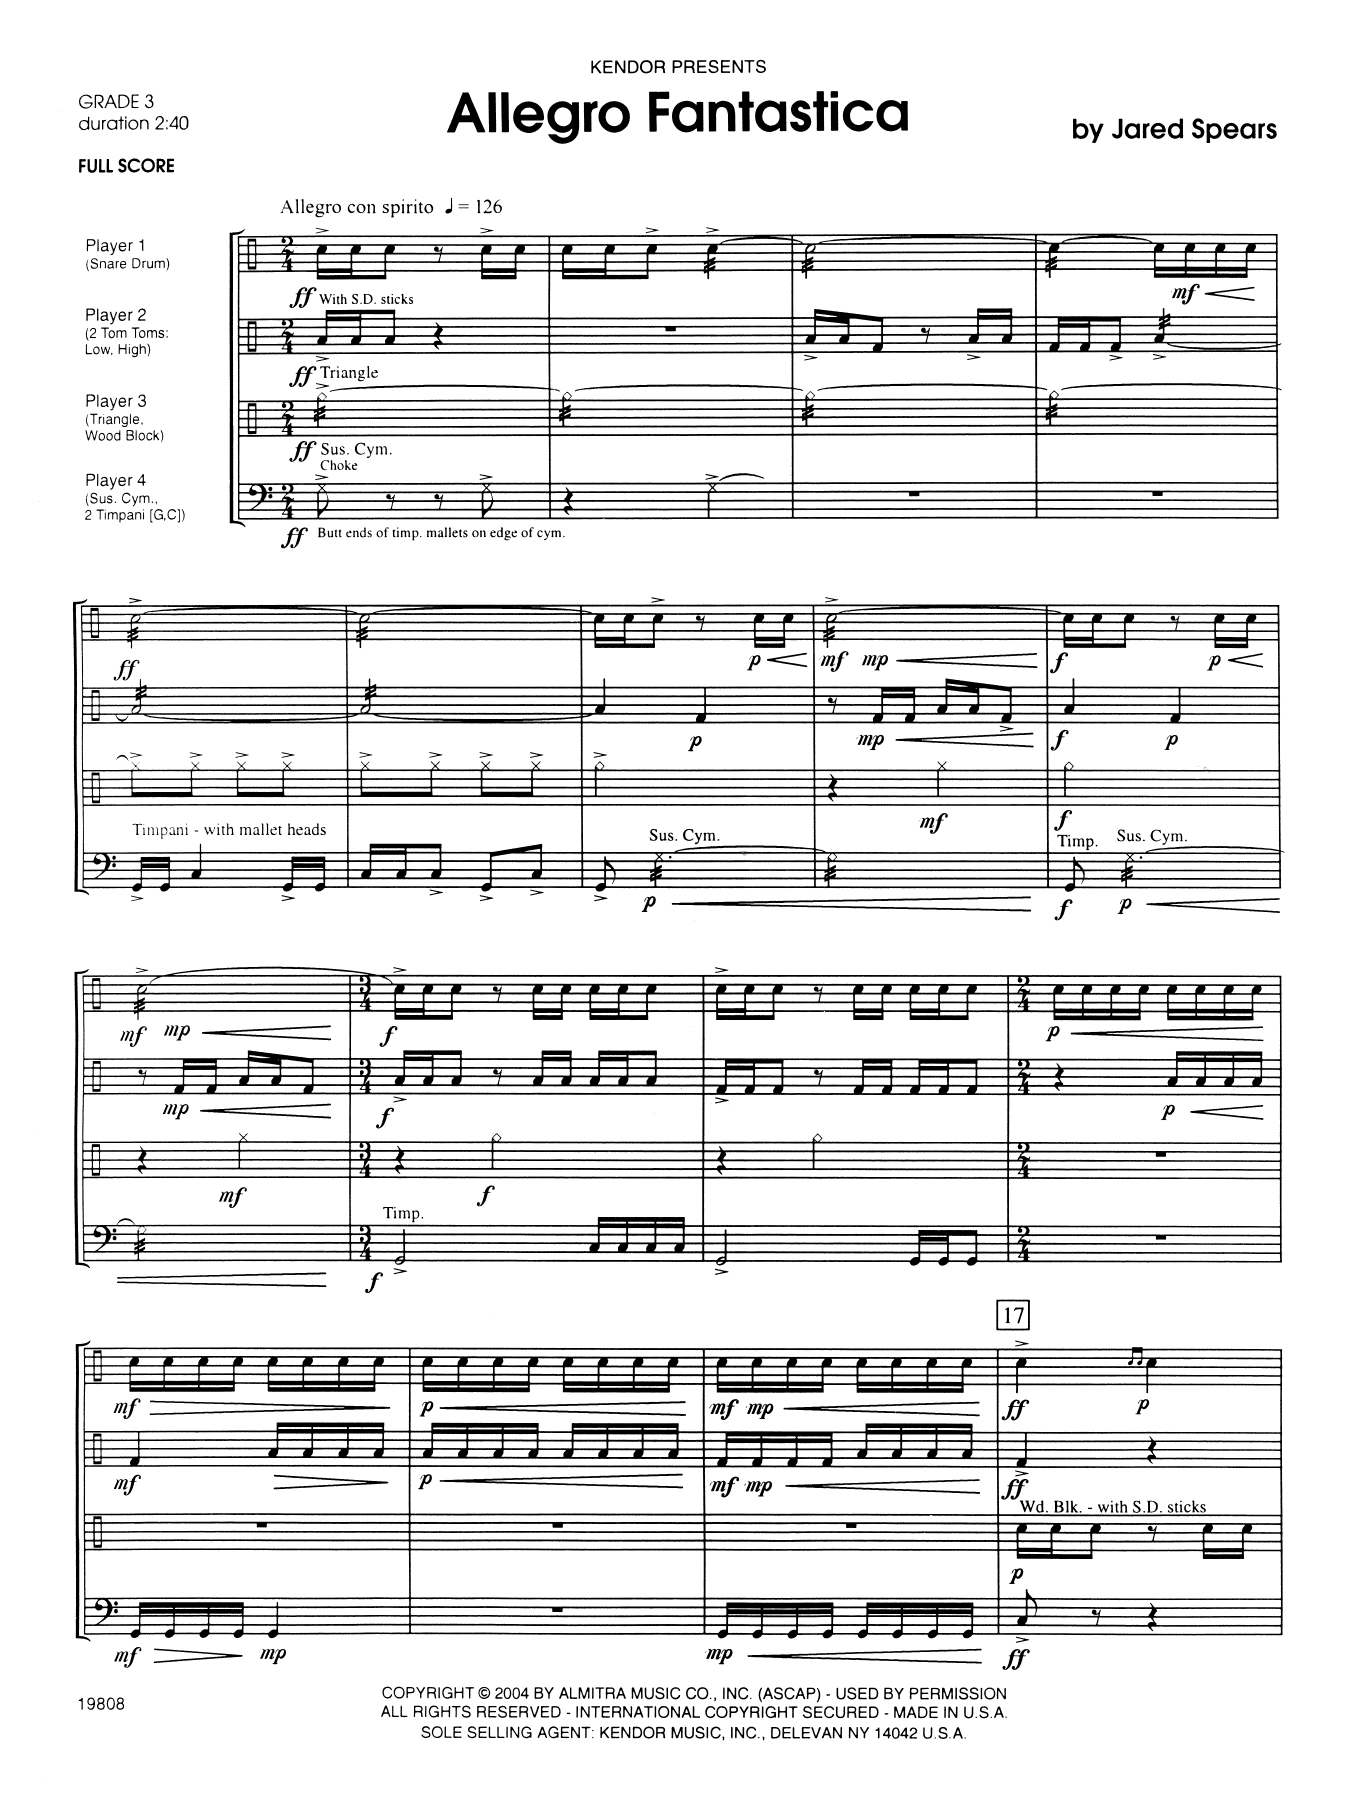 Jared Spears Allegro Fantastica - Full Score sheet music preview music notes and score for Percussion Ensemble including 9 page(s)